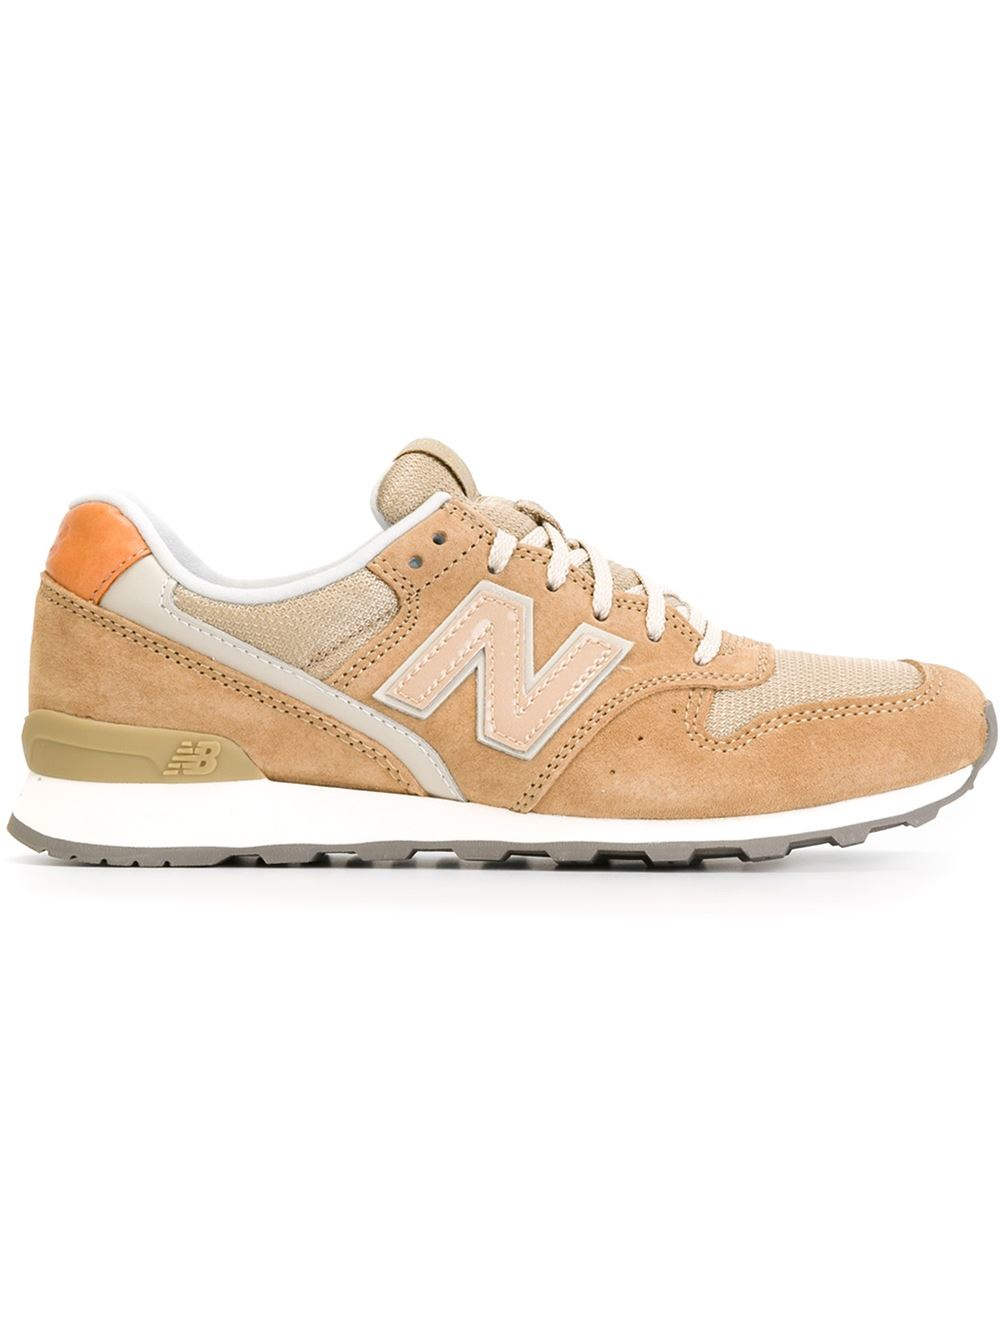 New Balance '996' Sneakers in Natural 